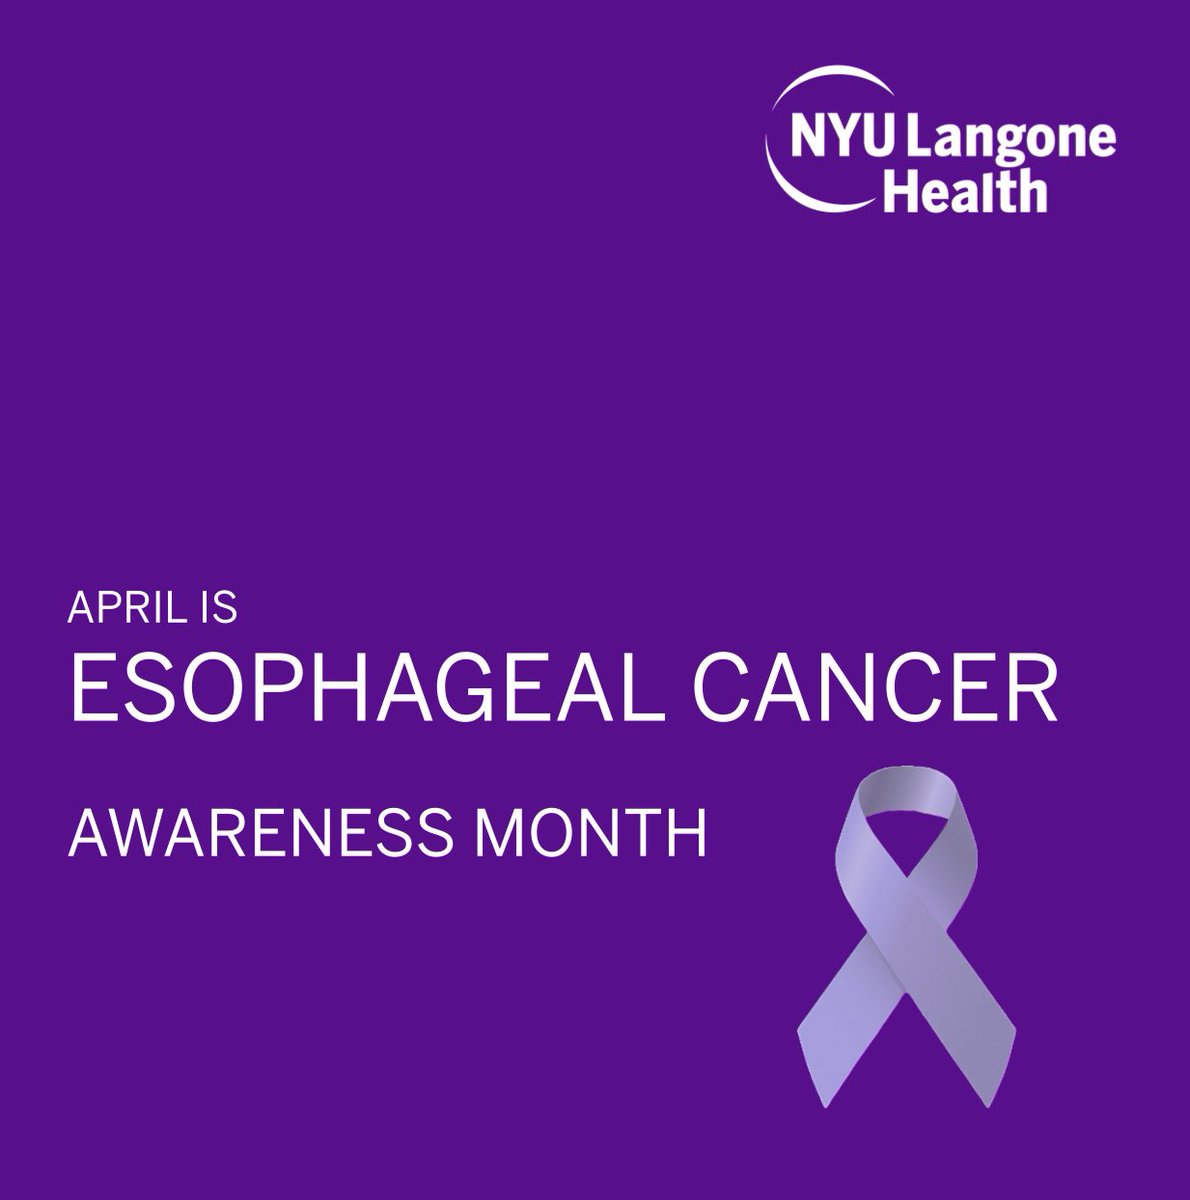 April is Esophageal Cancer Awareness Month. Did you know that early detection can save lives? Learn the signs and symptoms today. #EsophagealCancerAwareness #EarlyDetectionSavesLives